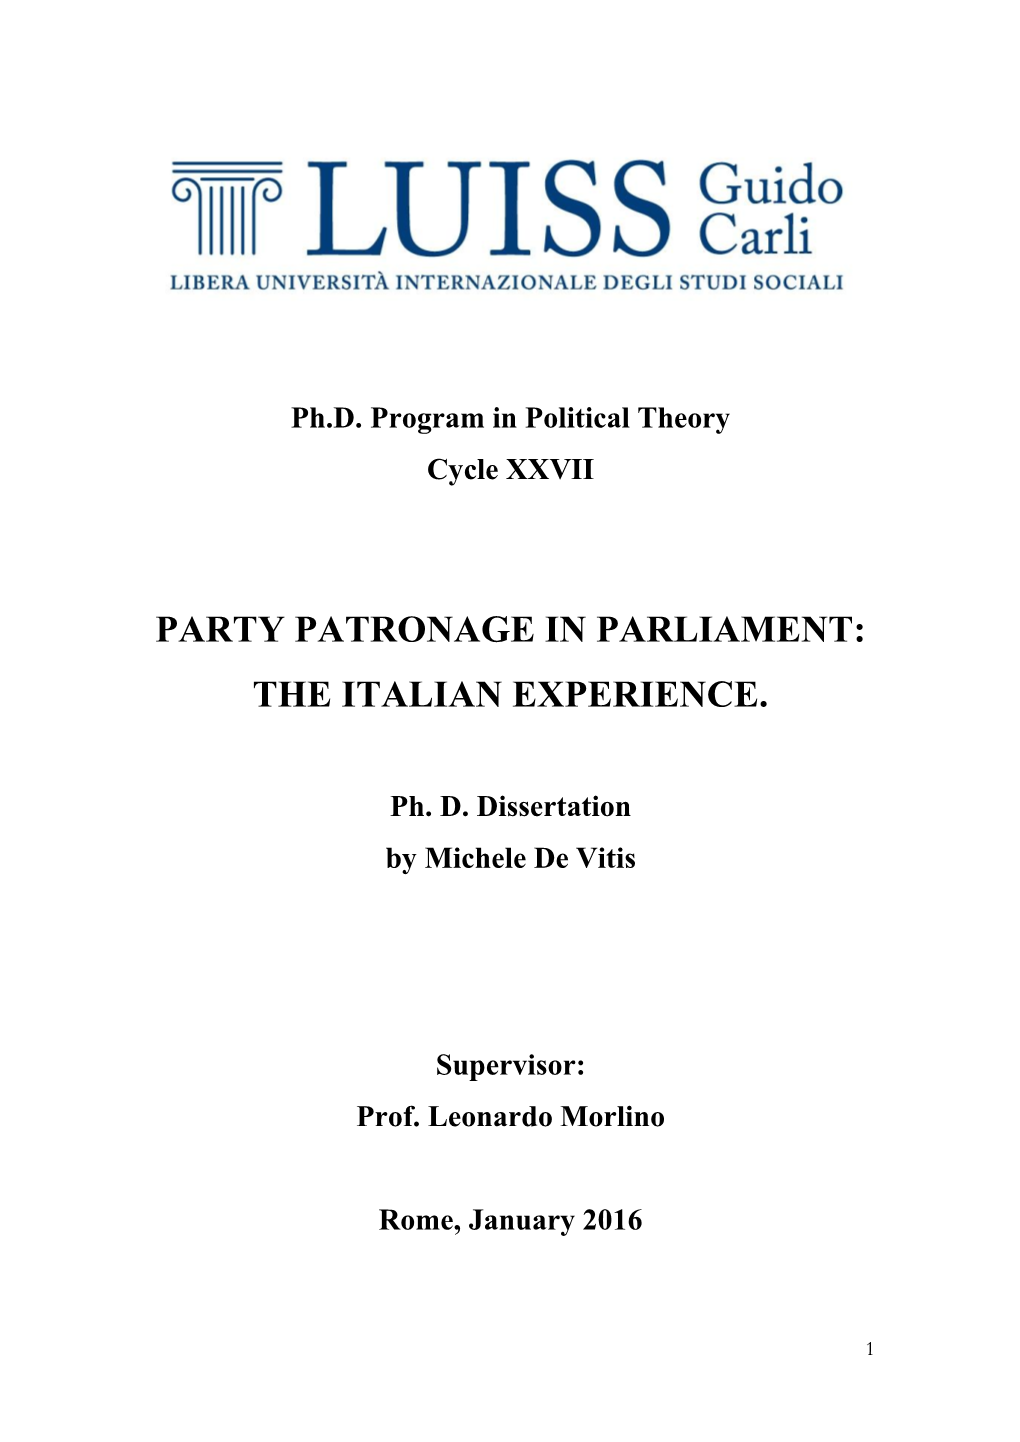 Party Patronage in Parliament: the Italian Experience